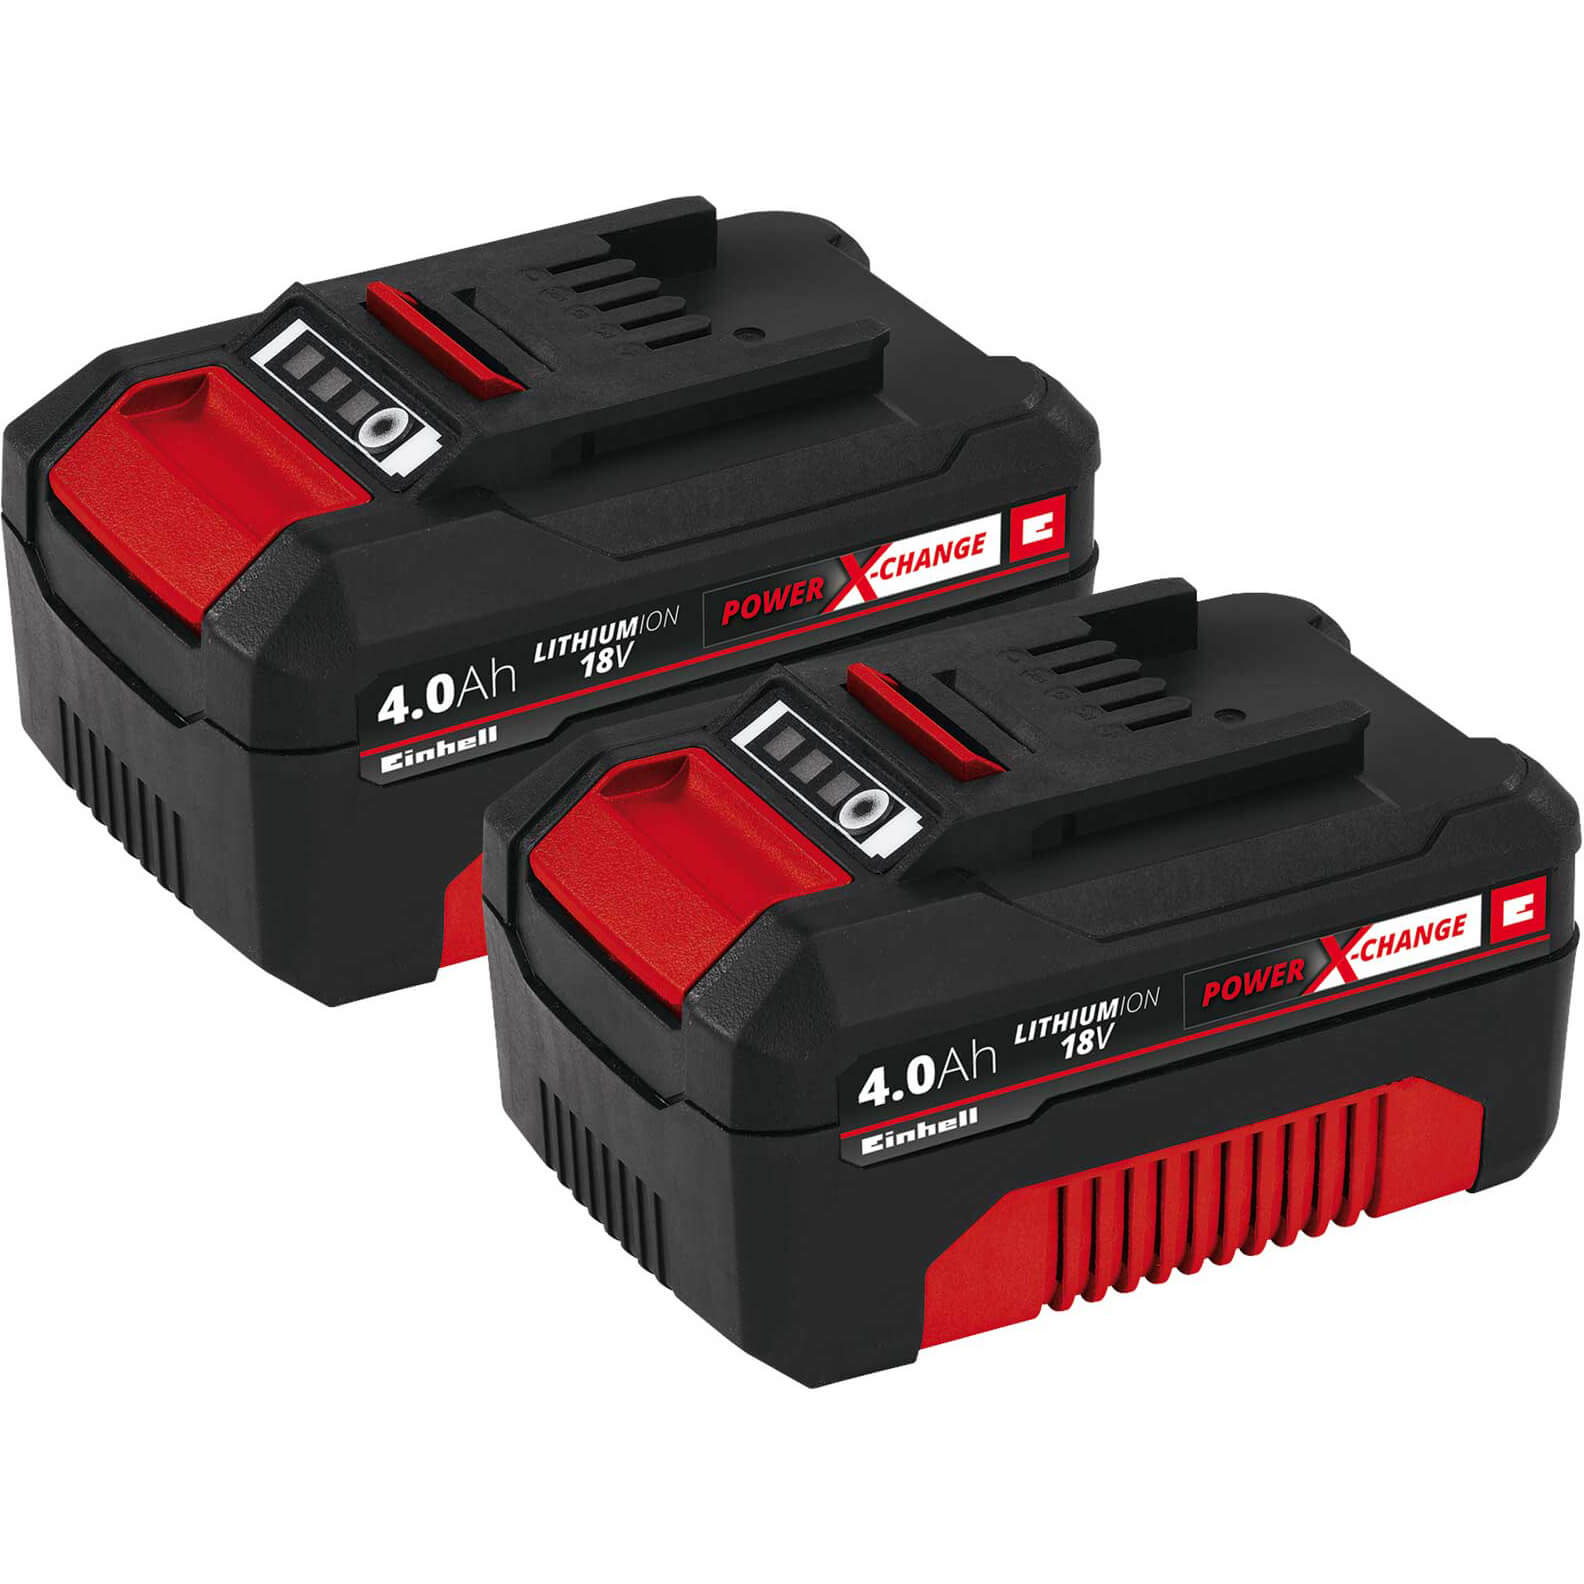 Photo of Einhell Genuine Power X-change Twin Pack Cordless Batteries 4ah 4ah